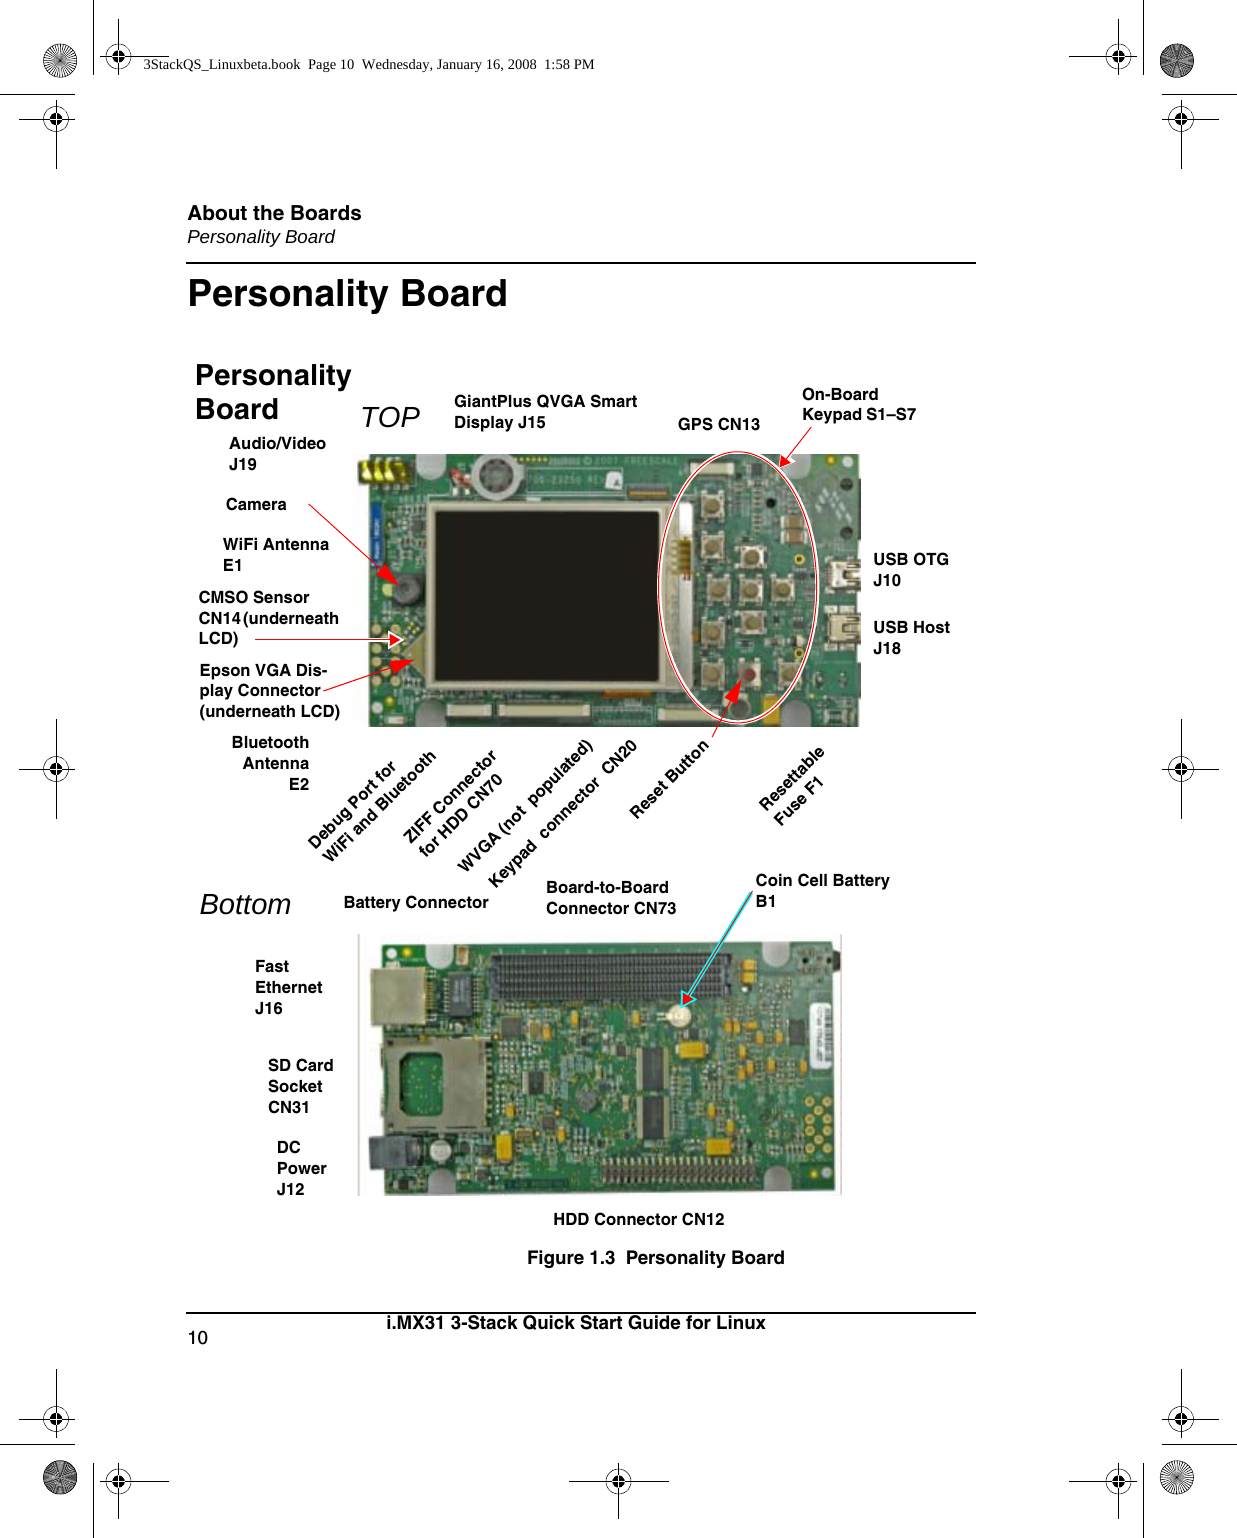 About the BoardsPersonality Board10 i.MX31 3-Stack Quick Start Guide for LinuxPersonality BoardFigure 1.3  Personality Board BluetoothAntennaE2Audio/Video J19USB OTG J10USB Host J18WiFi Antenna E1GPS CN13GiantPlus QVGA Smart Display J15CMSO Sensor CN14 (underneath LCD)Debug Port for WiFi and Bluetooth ZIFF Connector for HDD CN70WVGA (not  populated)Keypad  connector  CN20Resettable Fuse F1TOP On-Board Keypad S1–S7Fast Ethernet J16SD Card Socket CN31DC Power J12HDD Connector CN12Board-to-Board Connector CN73Coin Cell Battery B1BottomPersonality Board   CameraEpson VGA Dis-play Connector(underneath LCD)Reset ButtonBattery Connector 3StackQS_Linuxbeta.book  Page 10  Wednesday, January 16, 2008  1:58 PM